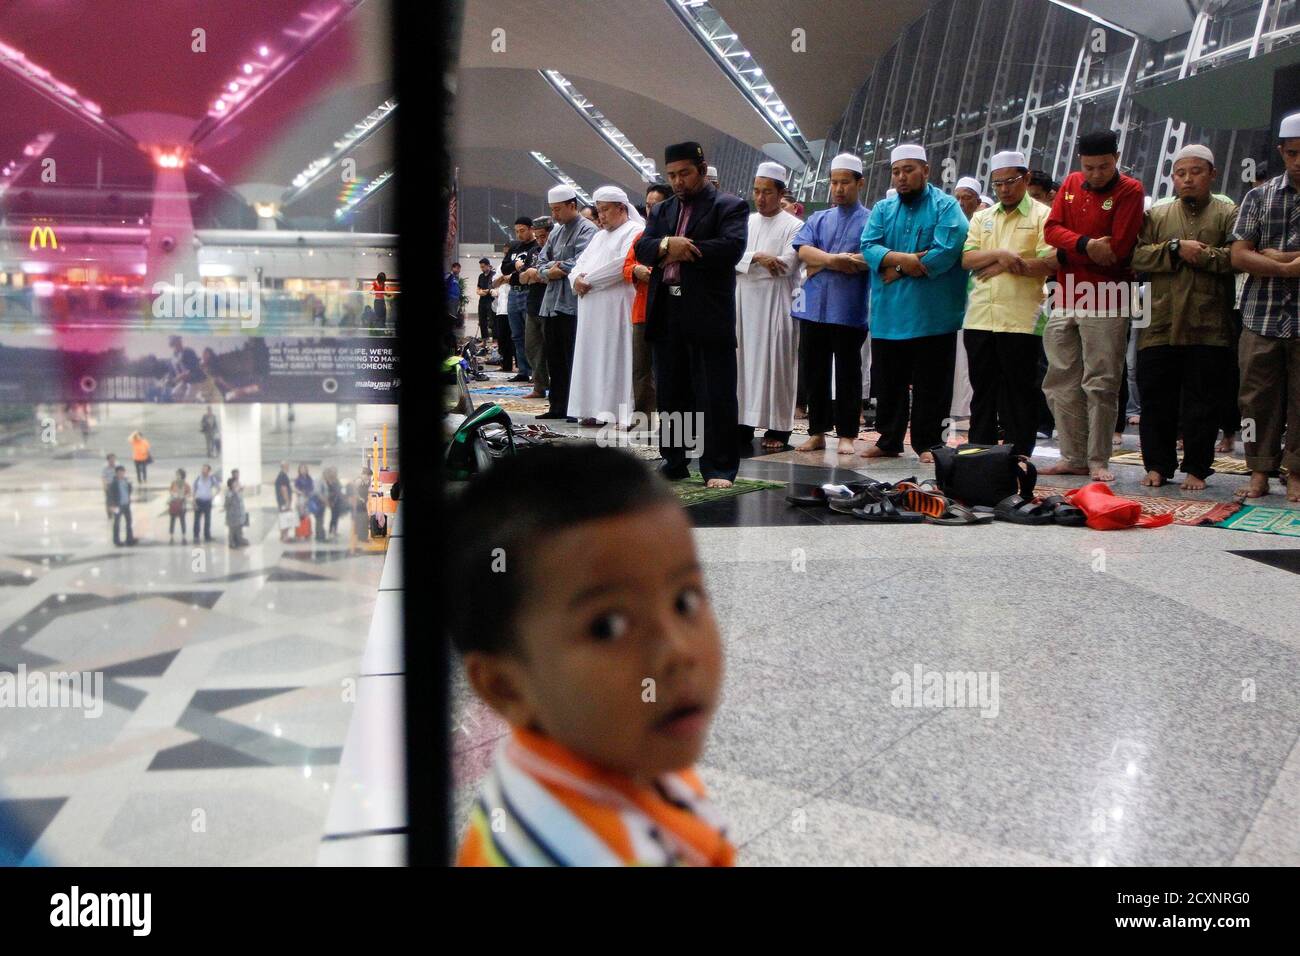 Muslims perform a special prayer for passengers of the missing Malaysia Airlines MH370 plane at the departure hall of the Kuala Lumpur International Airport March 13, 2014. Malaysian authorities said on Thursday there was no evidence that a jetliner missing for almost six days flew for hours after losing contact with air traffic controllers and continued to transmit technical data. REUTERS/Edgar Su  (MALAYSIA - Tags: TRANSPORT DISASTER RELIGION) Stock Photo